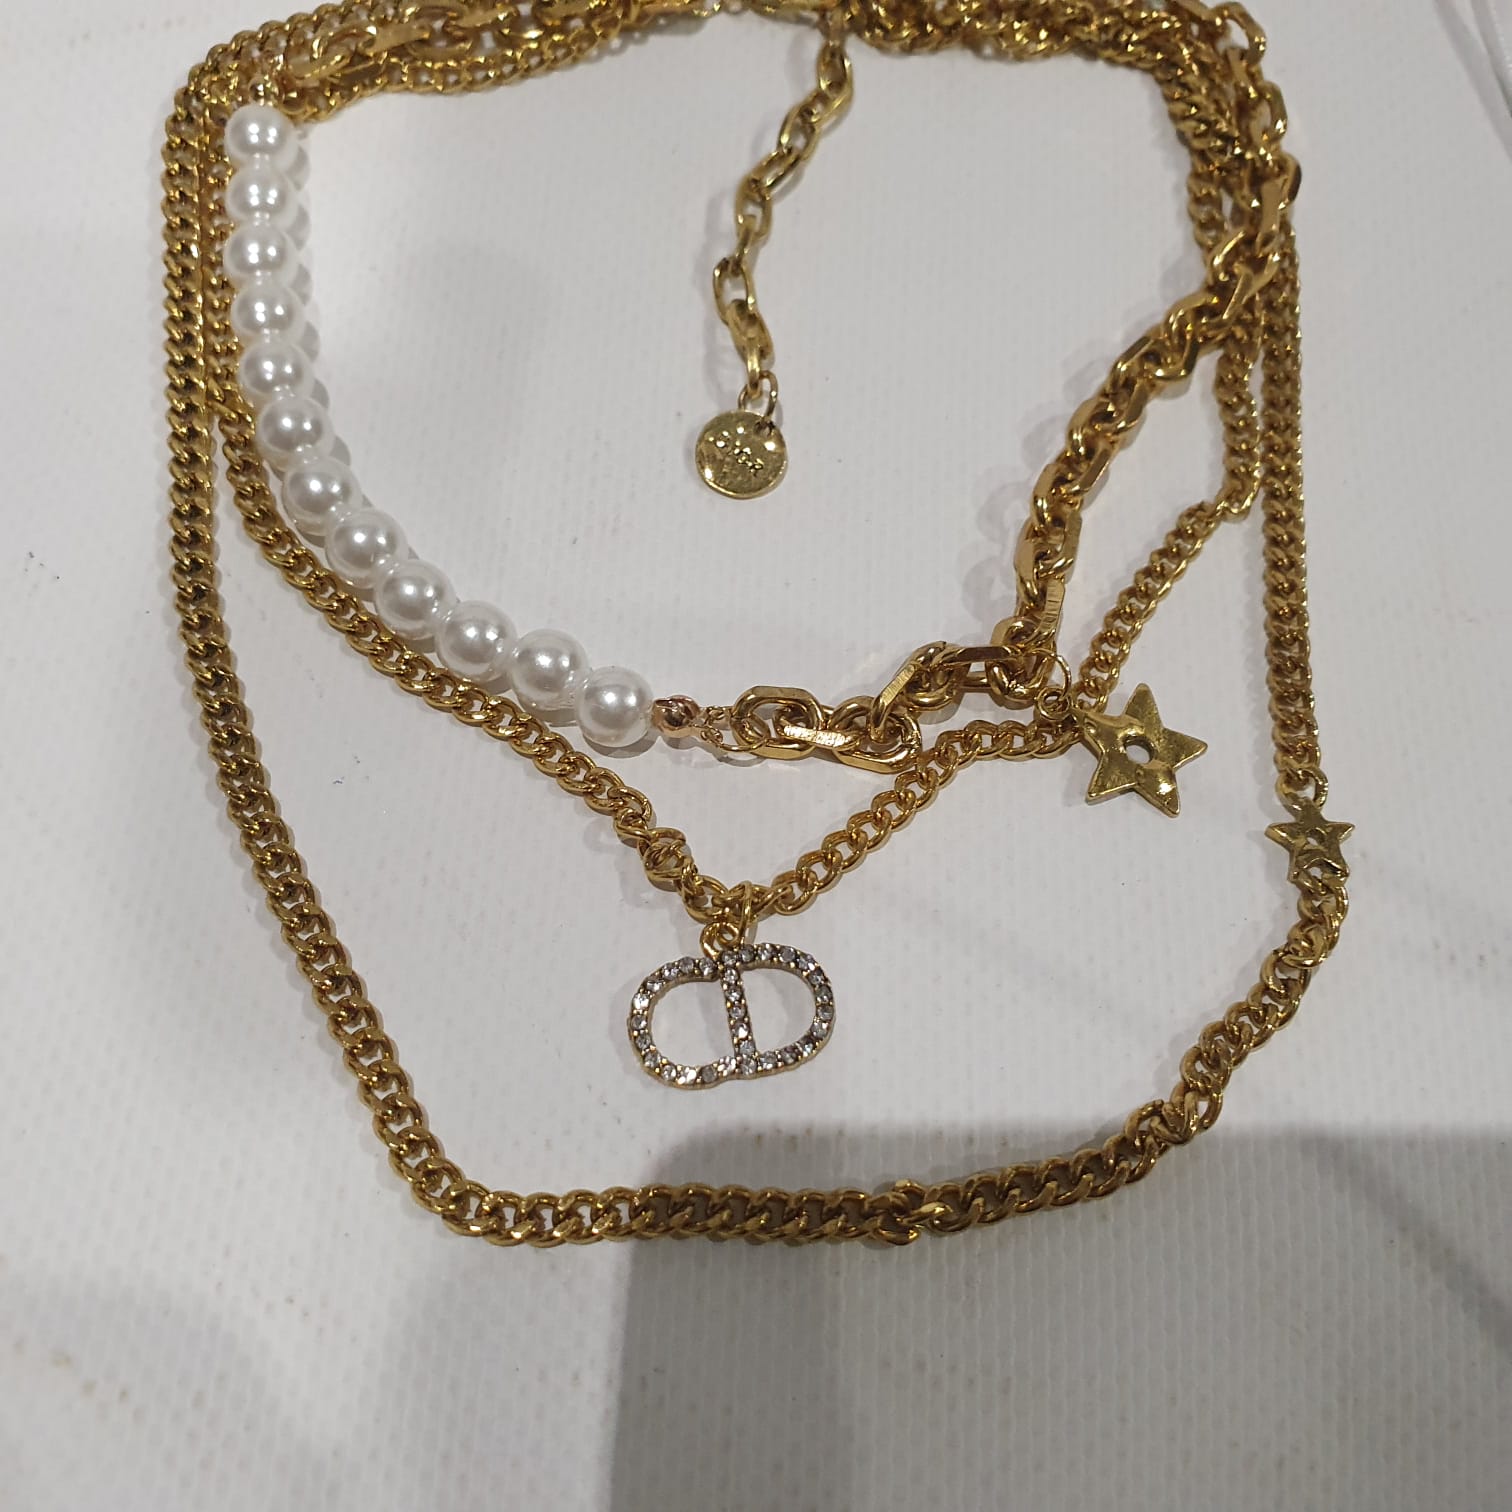 Christian Dior Necklace